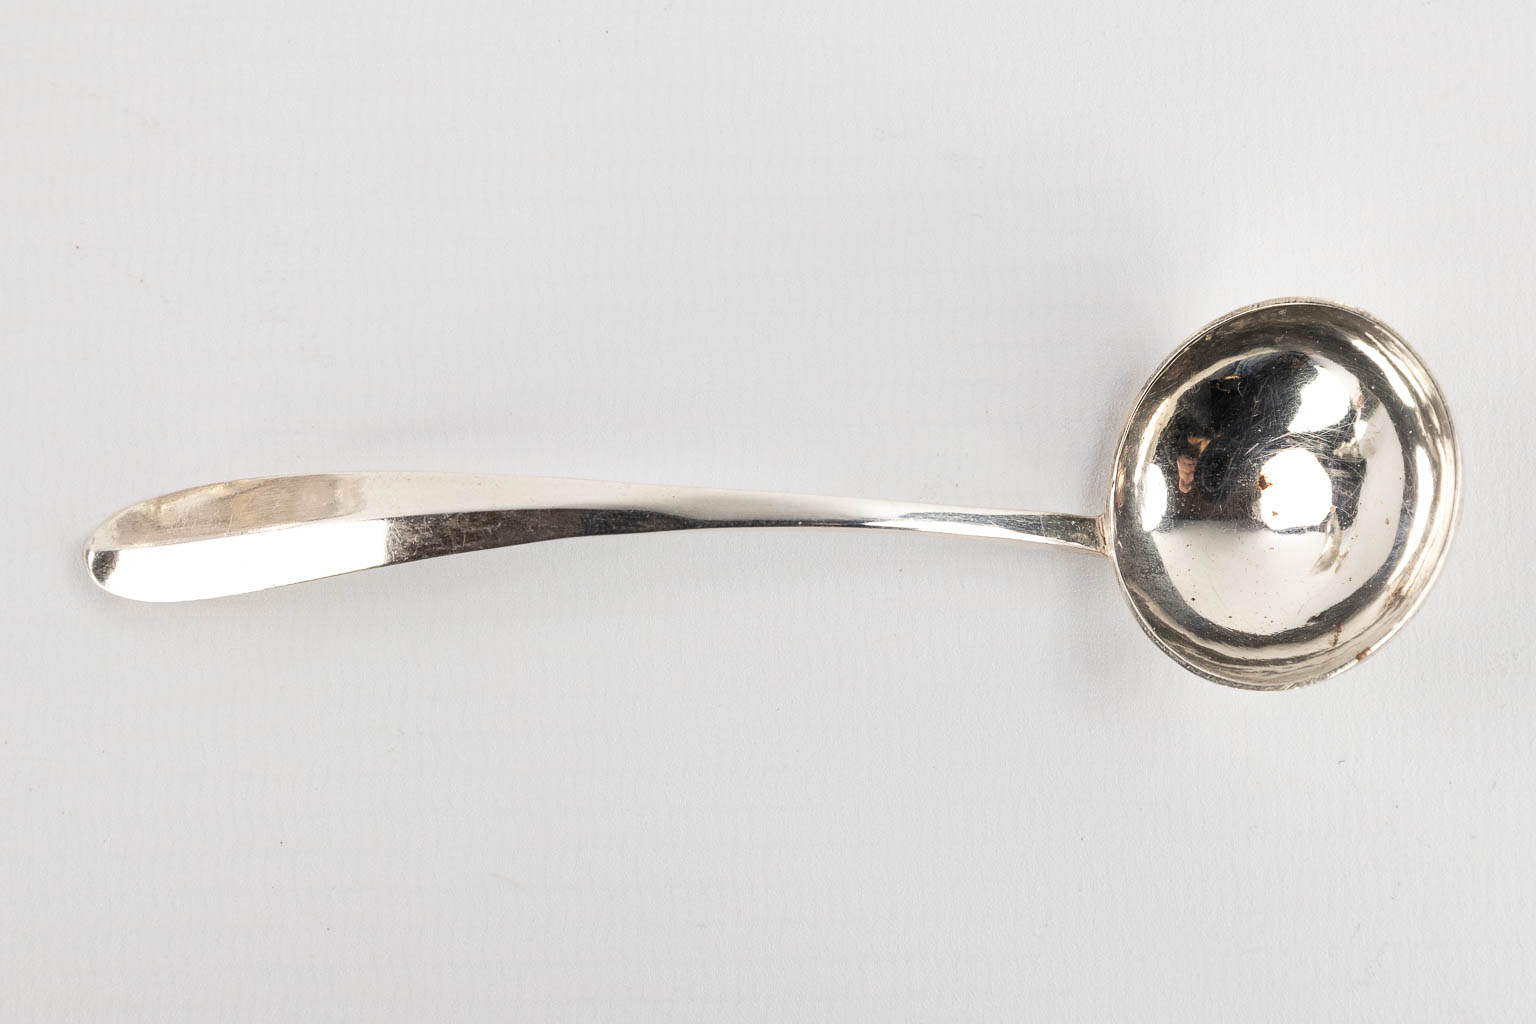 A silver incense burner, spoon, and incense boat, silver. 19th C. 1176g. (H:33 x D:15 cm)